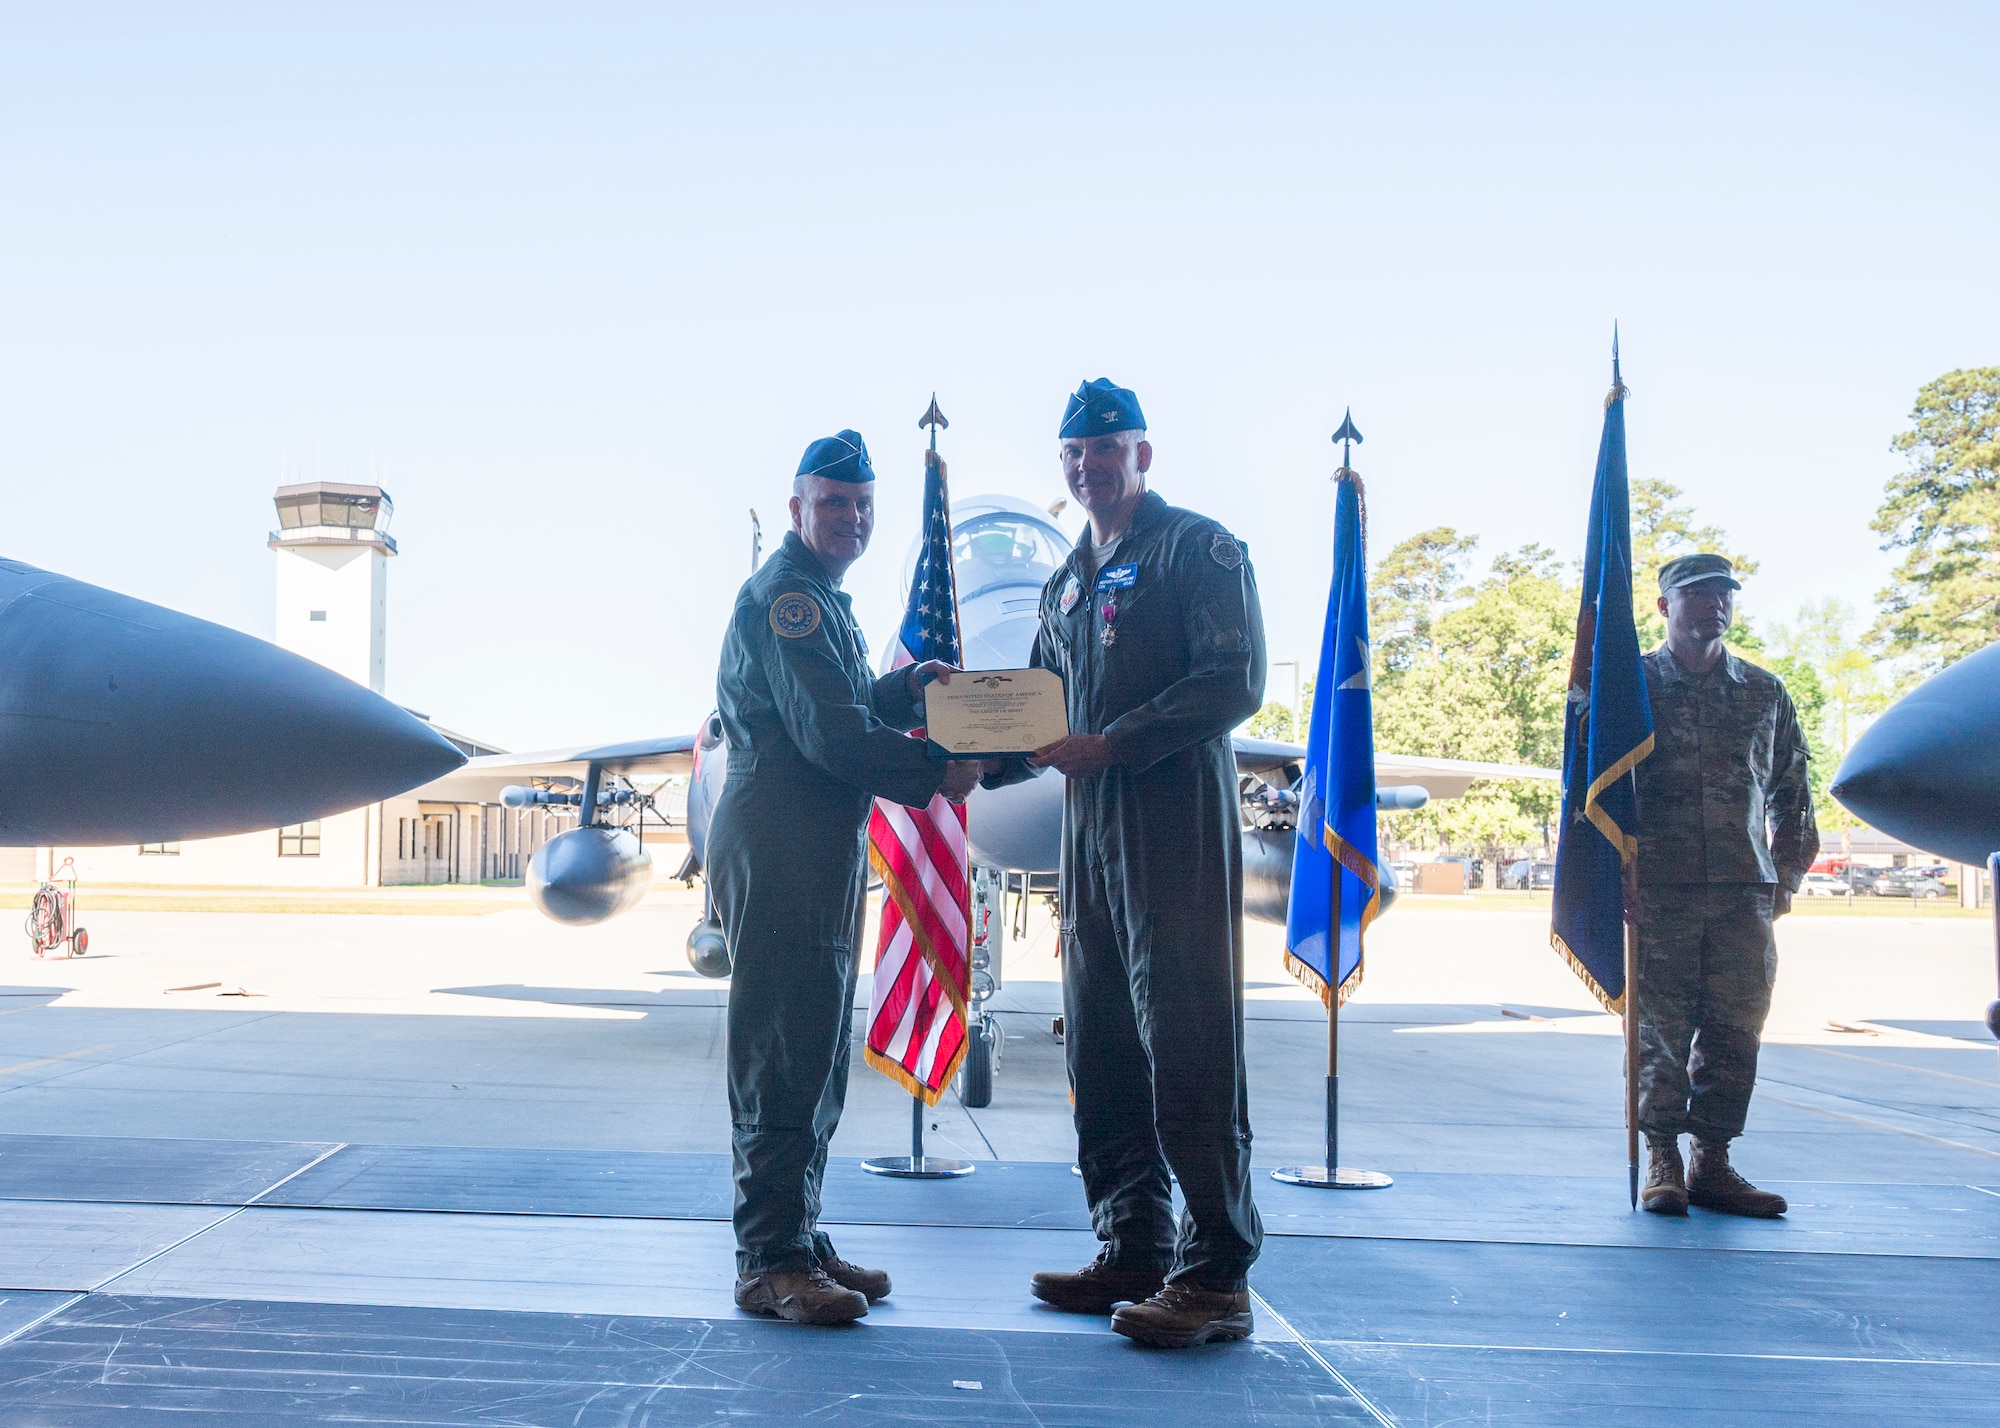 Maj. Gen. Michael G. Koscheski, left, Fifteenth Air Force commander, presents the Legion of Merit citation to Col. Kurt Helphinstine, outgoing 4th Fighter Wing commander, as he relinquishes command of the 4th FW during a Change of Command ceremony at Seymour Johnson Air Force Base, North Carolina, May 11, 2022. Helphinstine was the commander of the 4th FW for approximately two years. (U.S. Air Force photo by Senior Airman Kimberly Barrera)